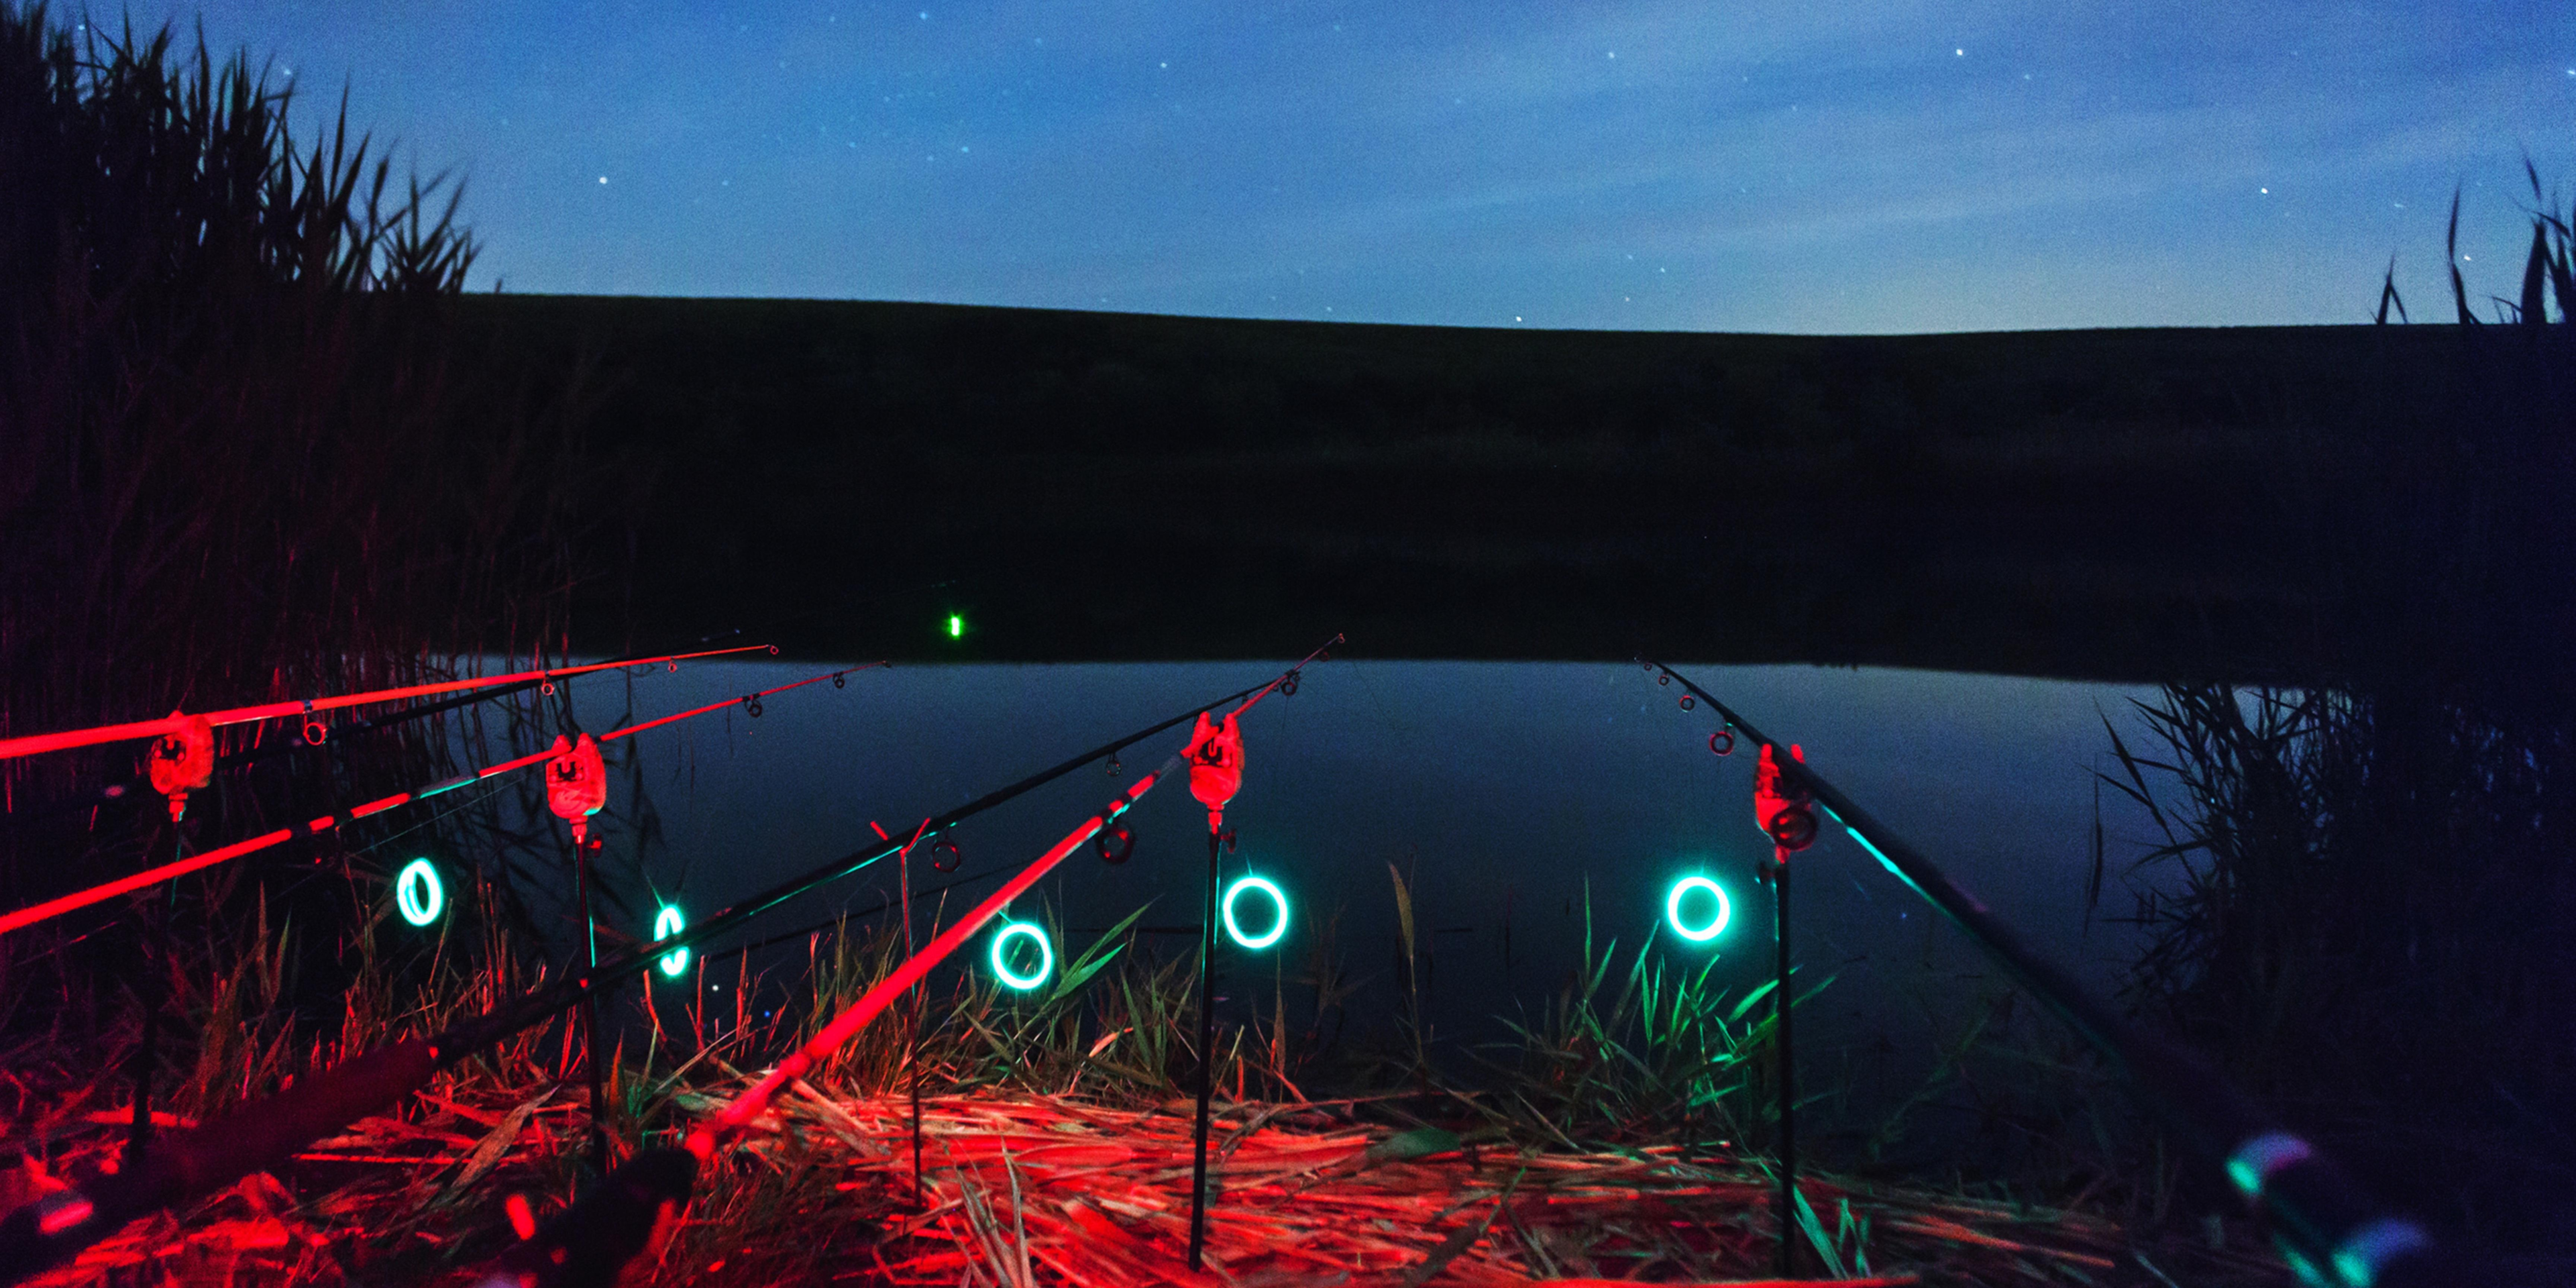 Night Fishing for Trout - Headlamps, Flashlights and Glow-in-the